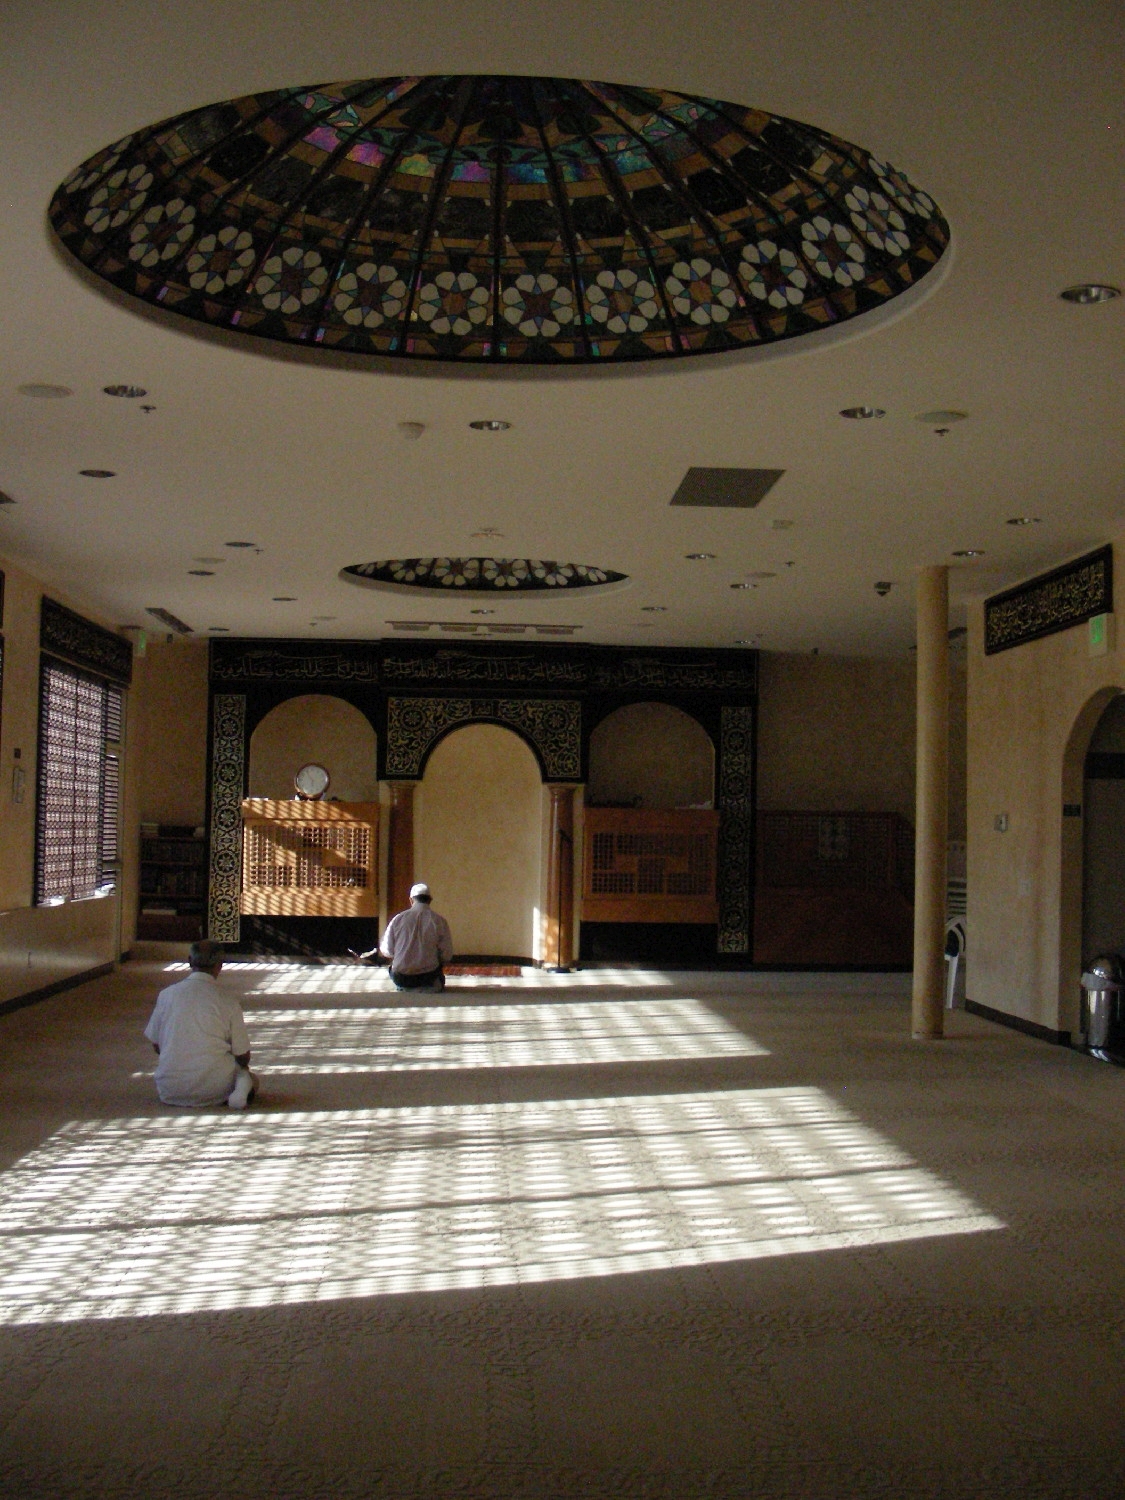 Prayer hall, view towards qibla wall. Patterned shadows from lattice windows visible on carpet